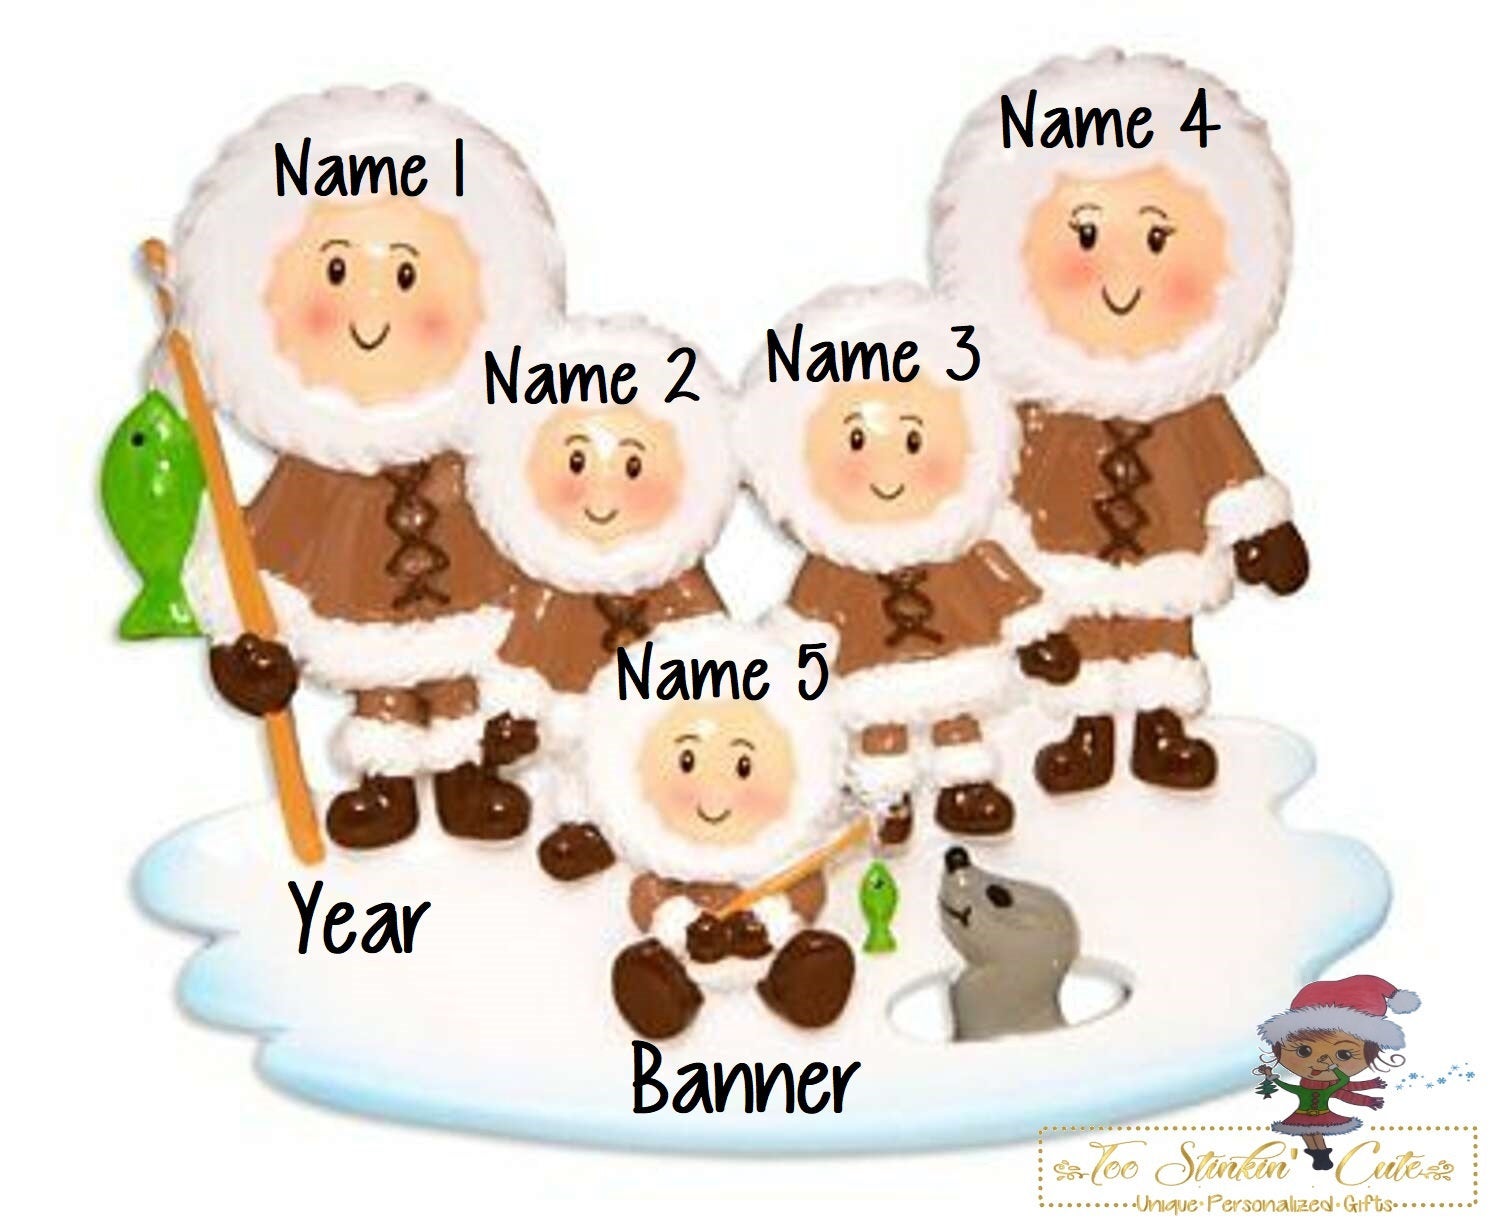 Personalized Christmas Ornament Eskimo Family of 5 + Free Shipping!/ Friends/ Coworkers Snow